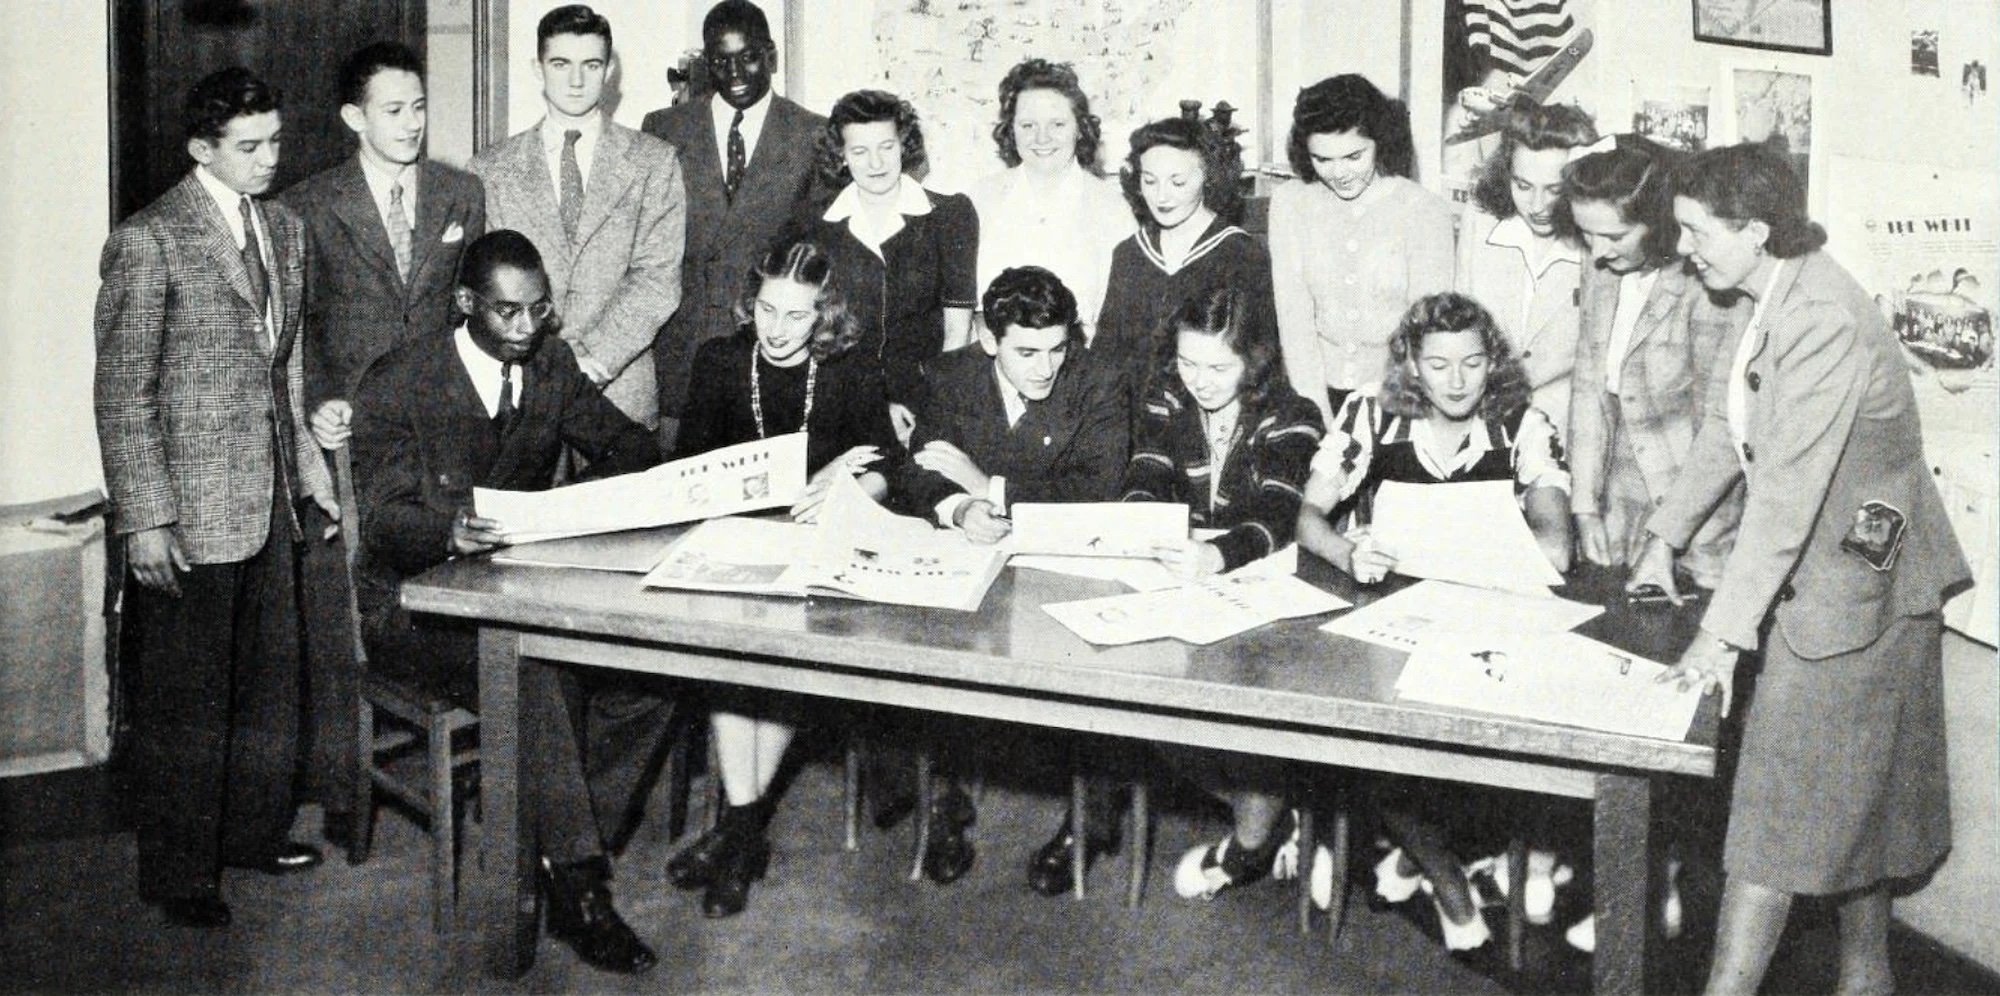 The Whit staff gathered for a photo published in 1943 yearbook.